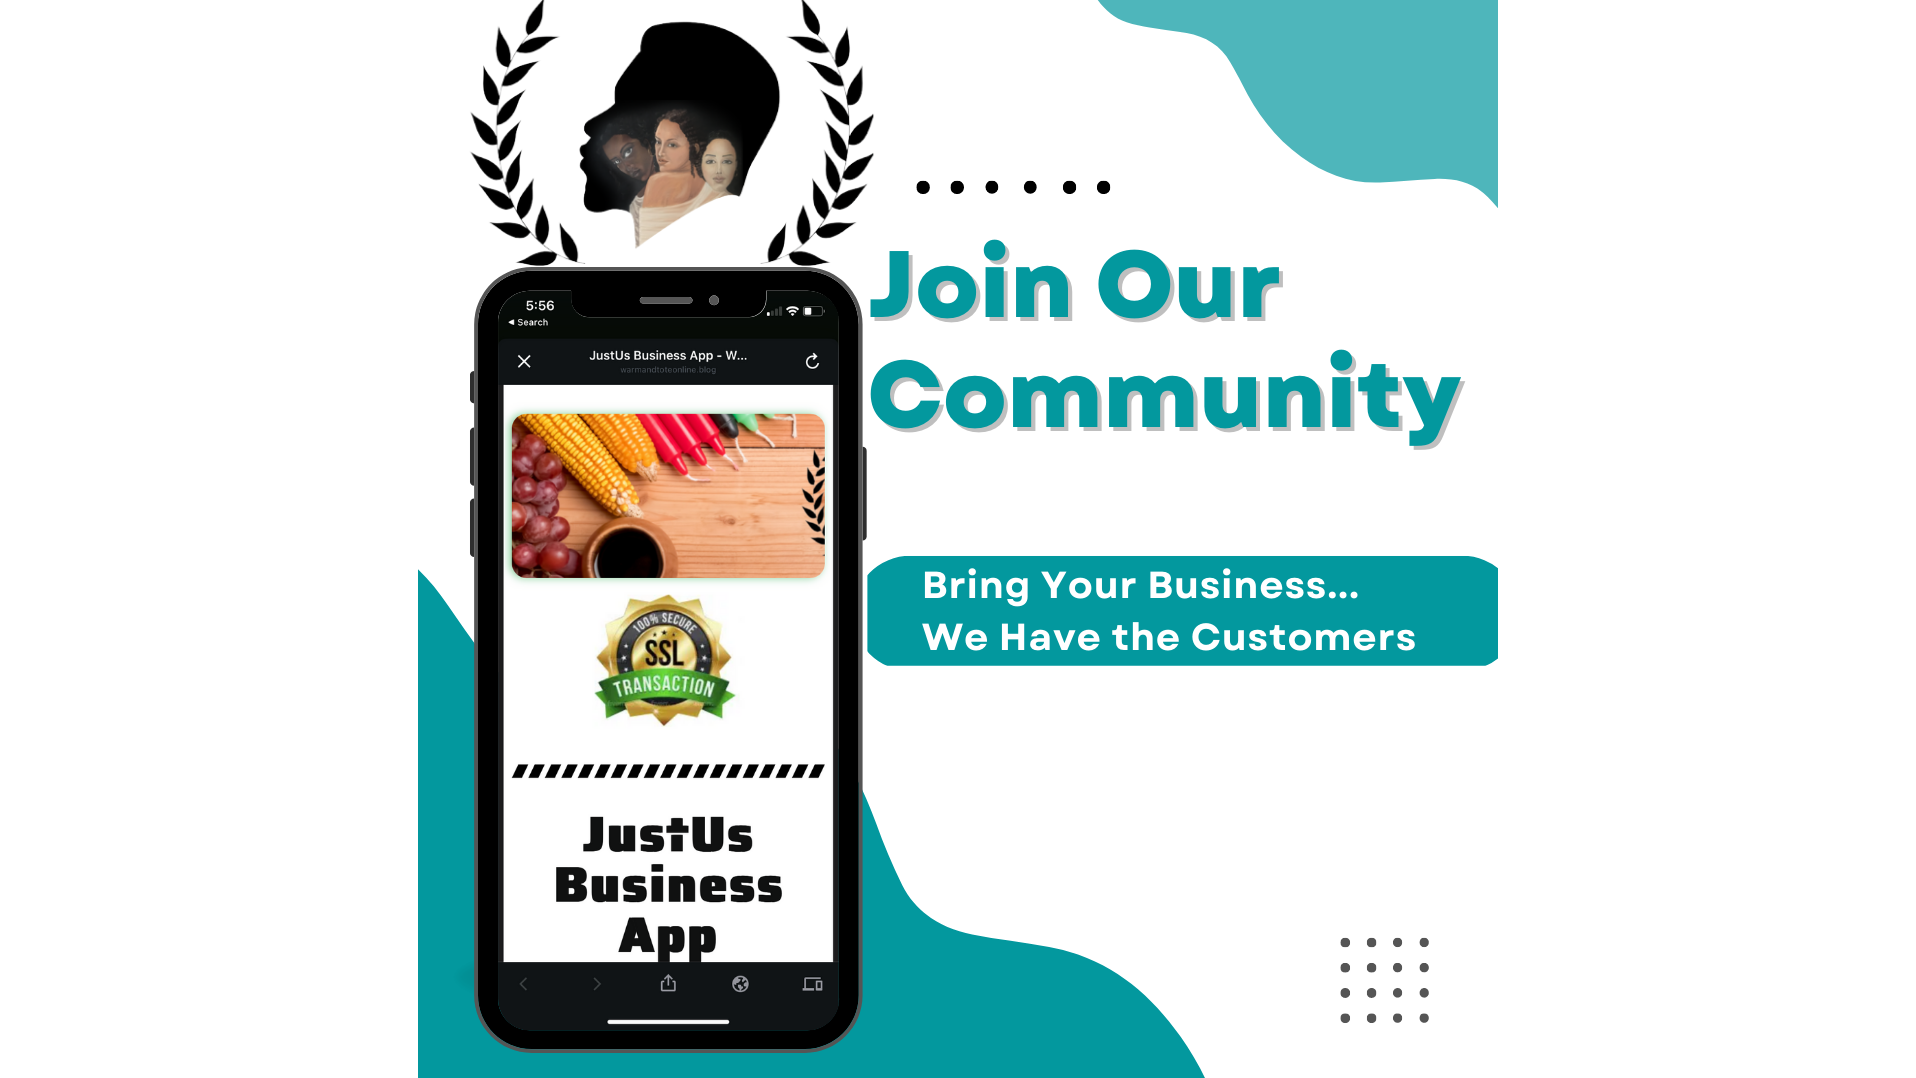 The JustUs Business App: A Disrupting Marketplace Serving Black-Owned Business